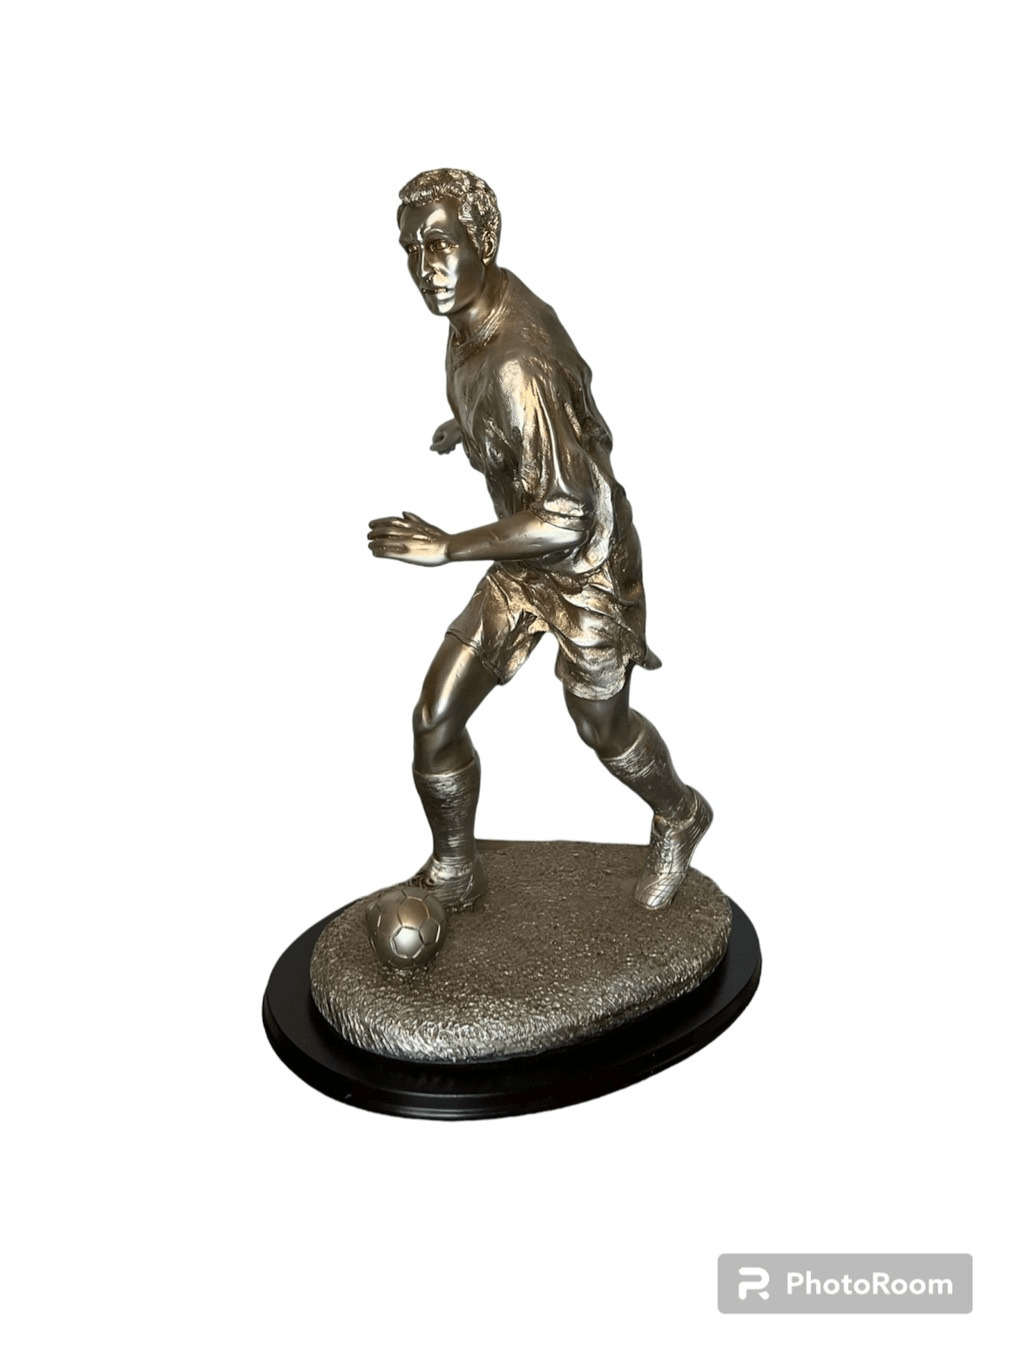 Large Table Top Soccer Player Statue On Wooden Base Silver Tone Statue 20” Tall